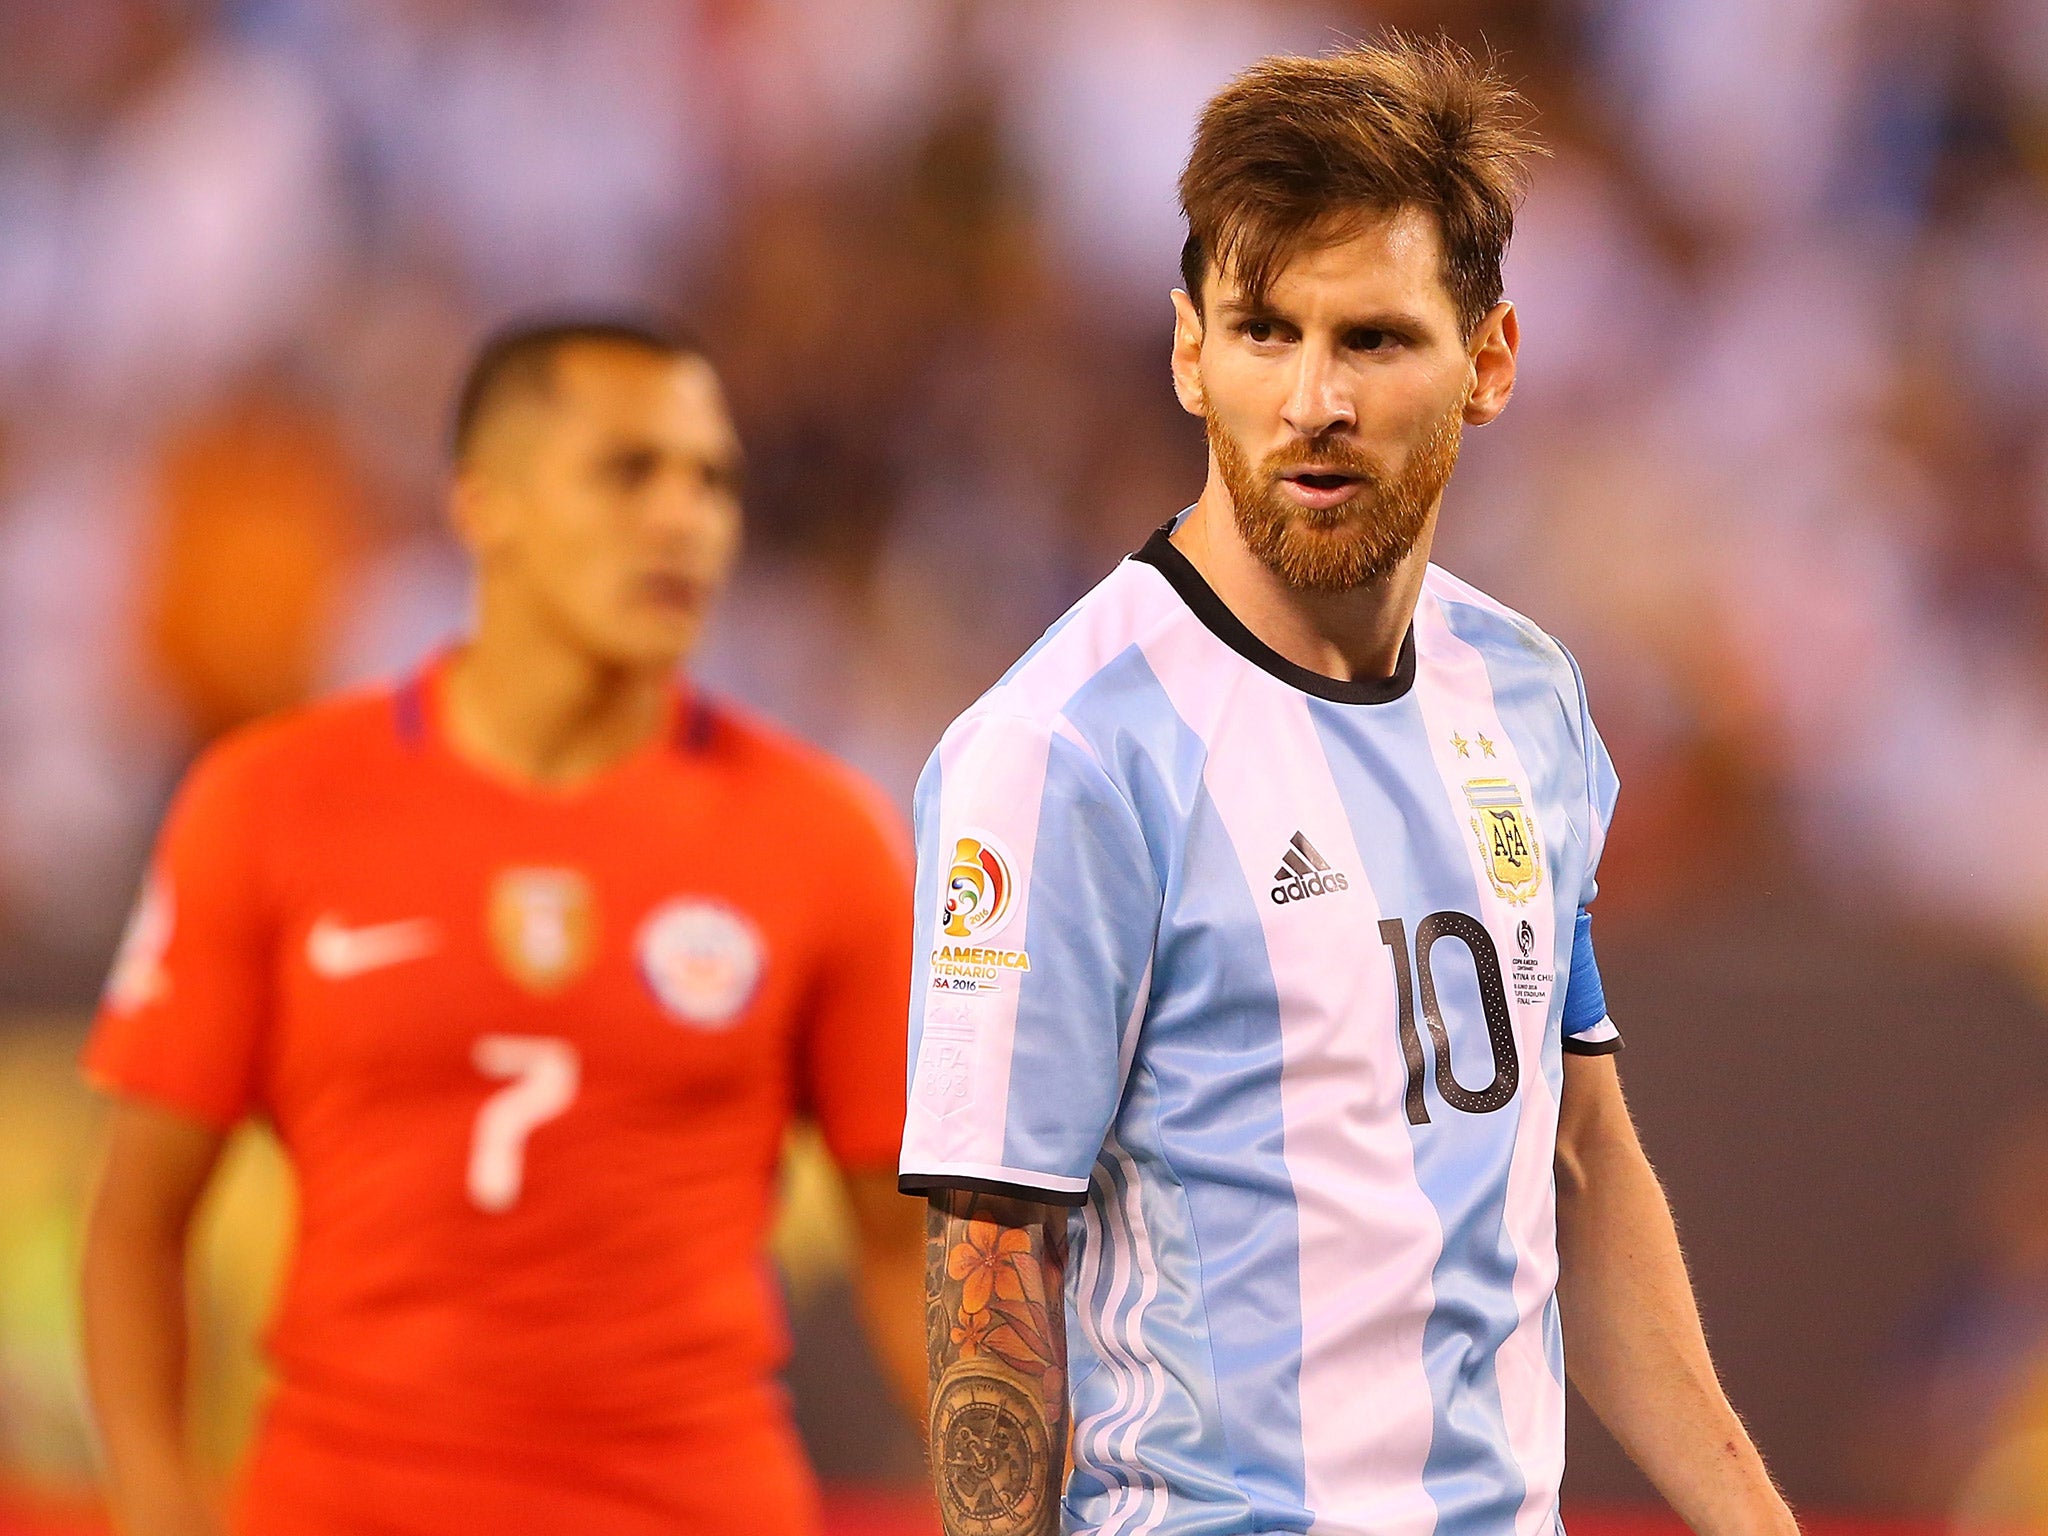 Lionel Messi has retired from international football after Argentina's Copa America final defeat